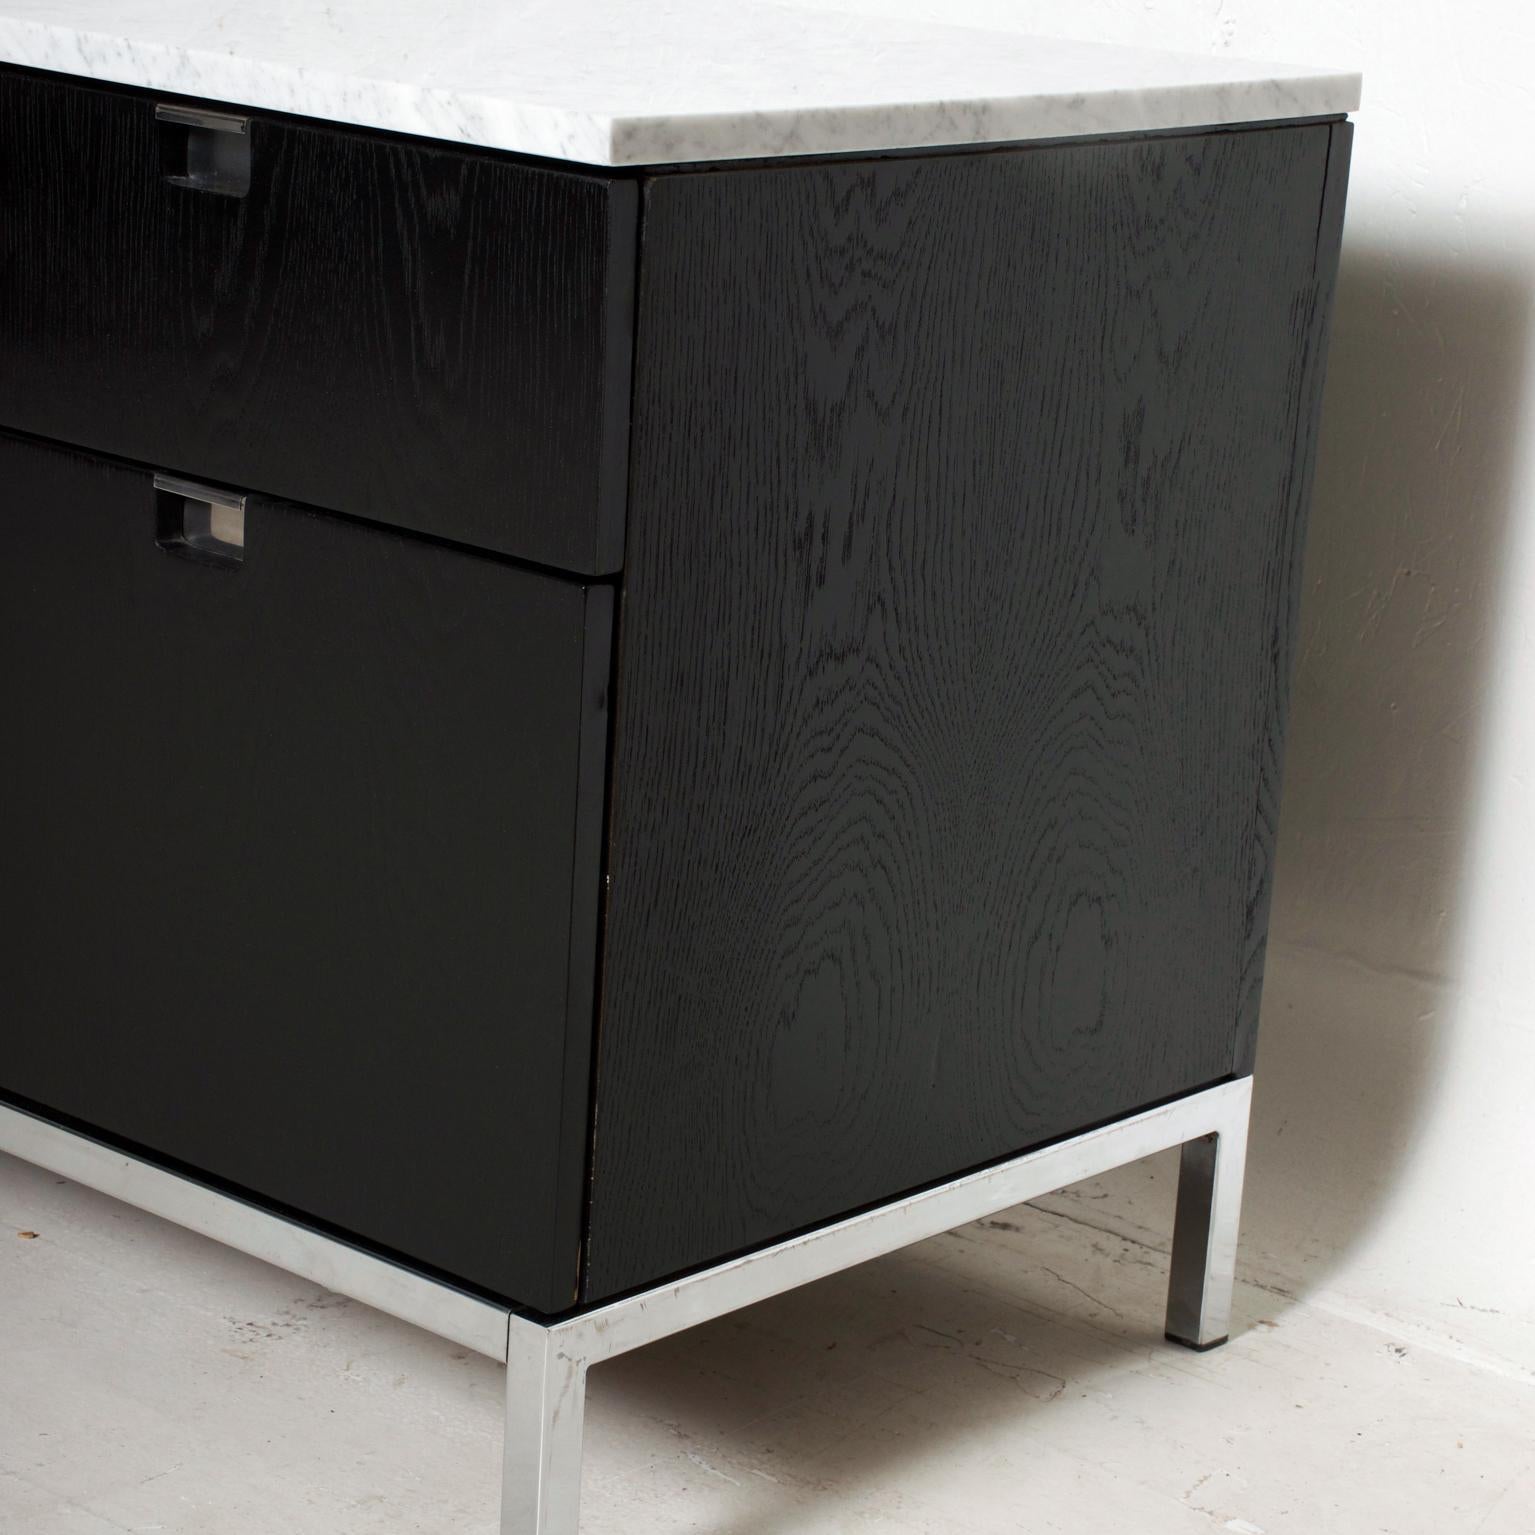 Painted Florence Knoll Credenza with White Carrera Marble in Black Oak